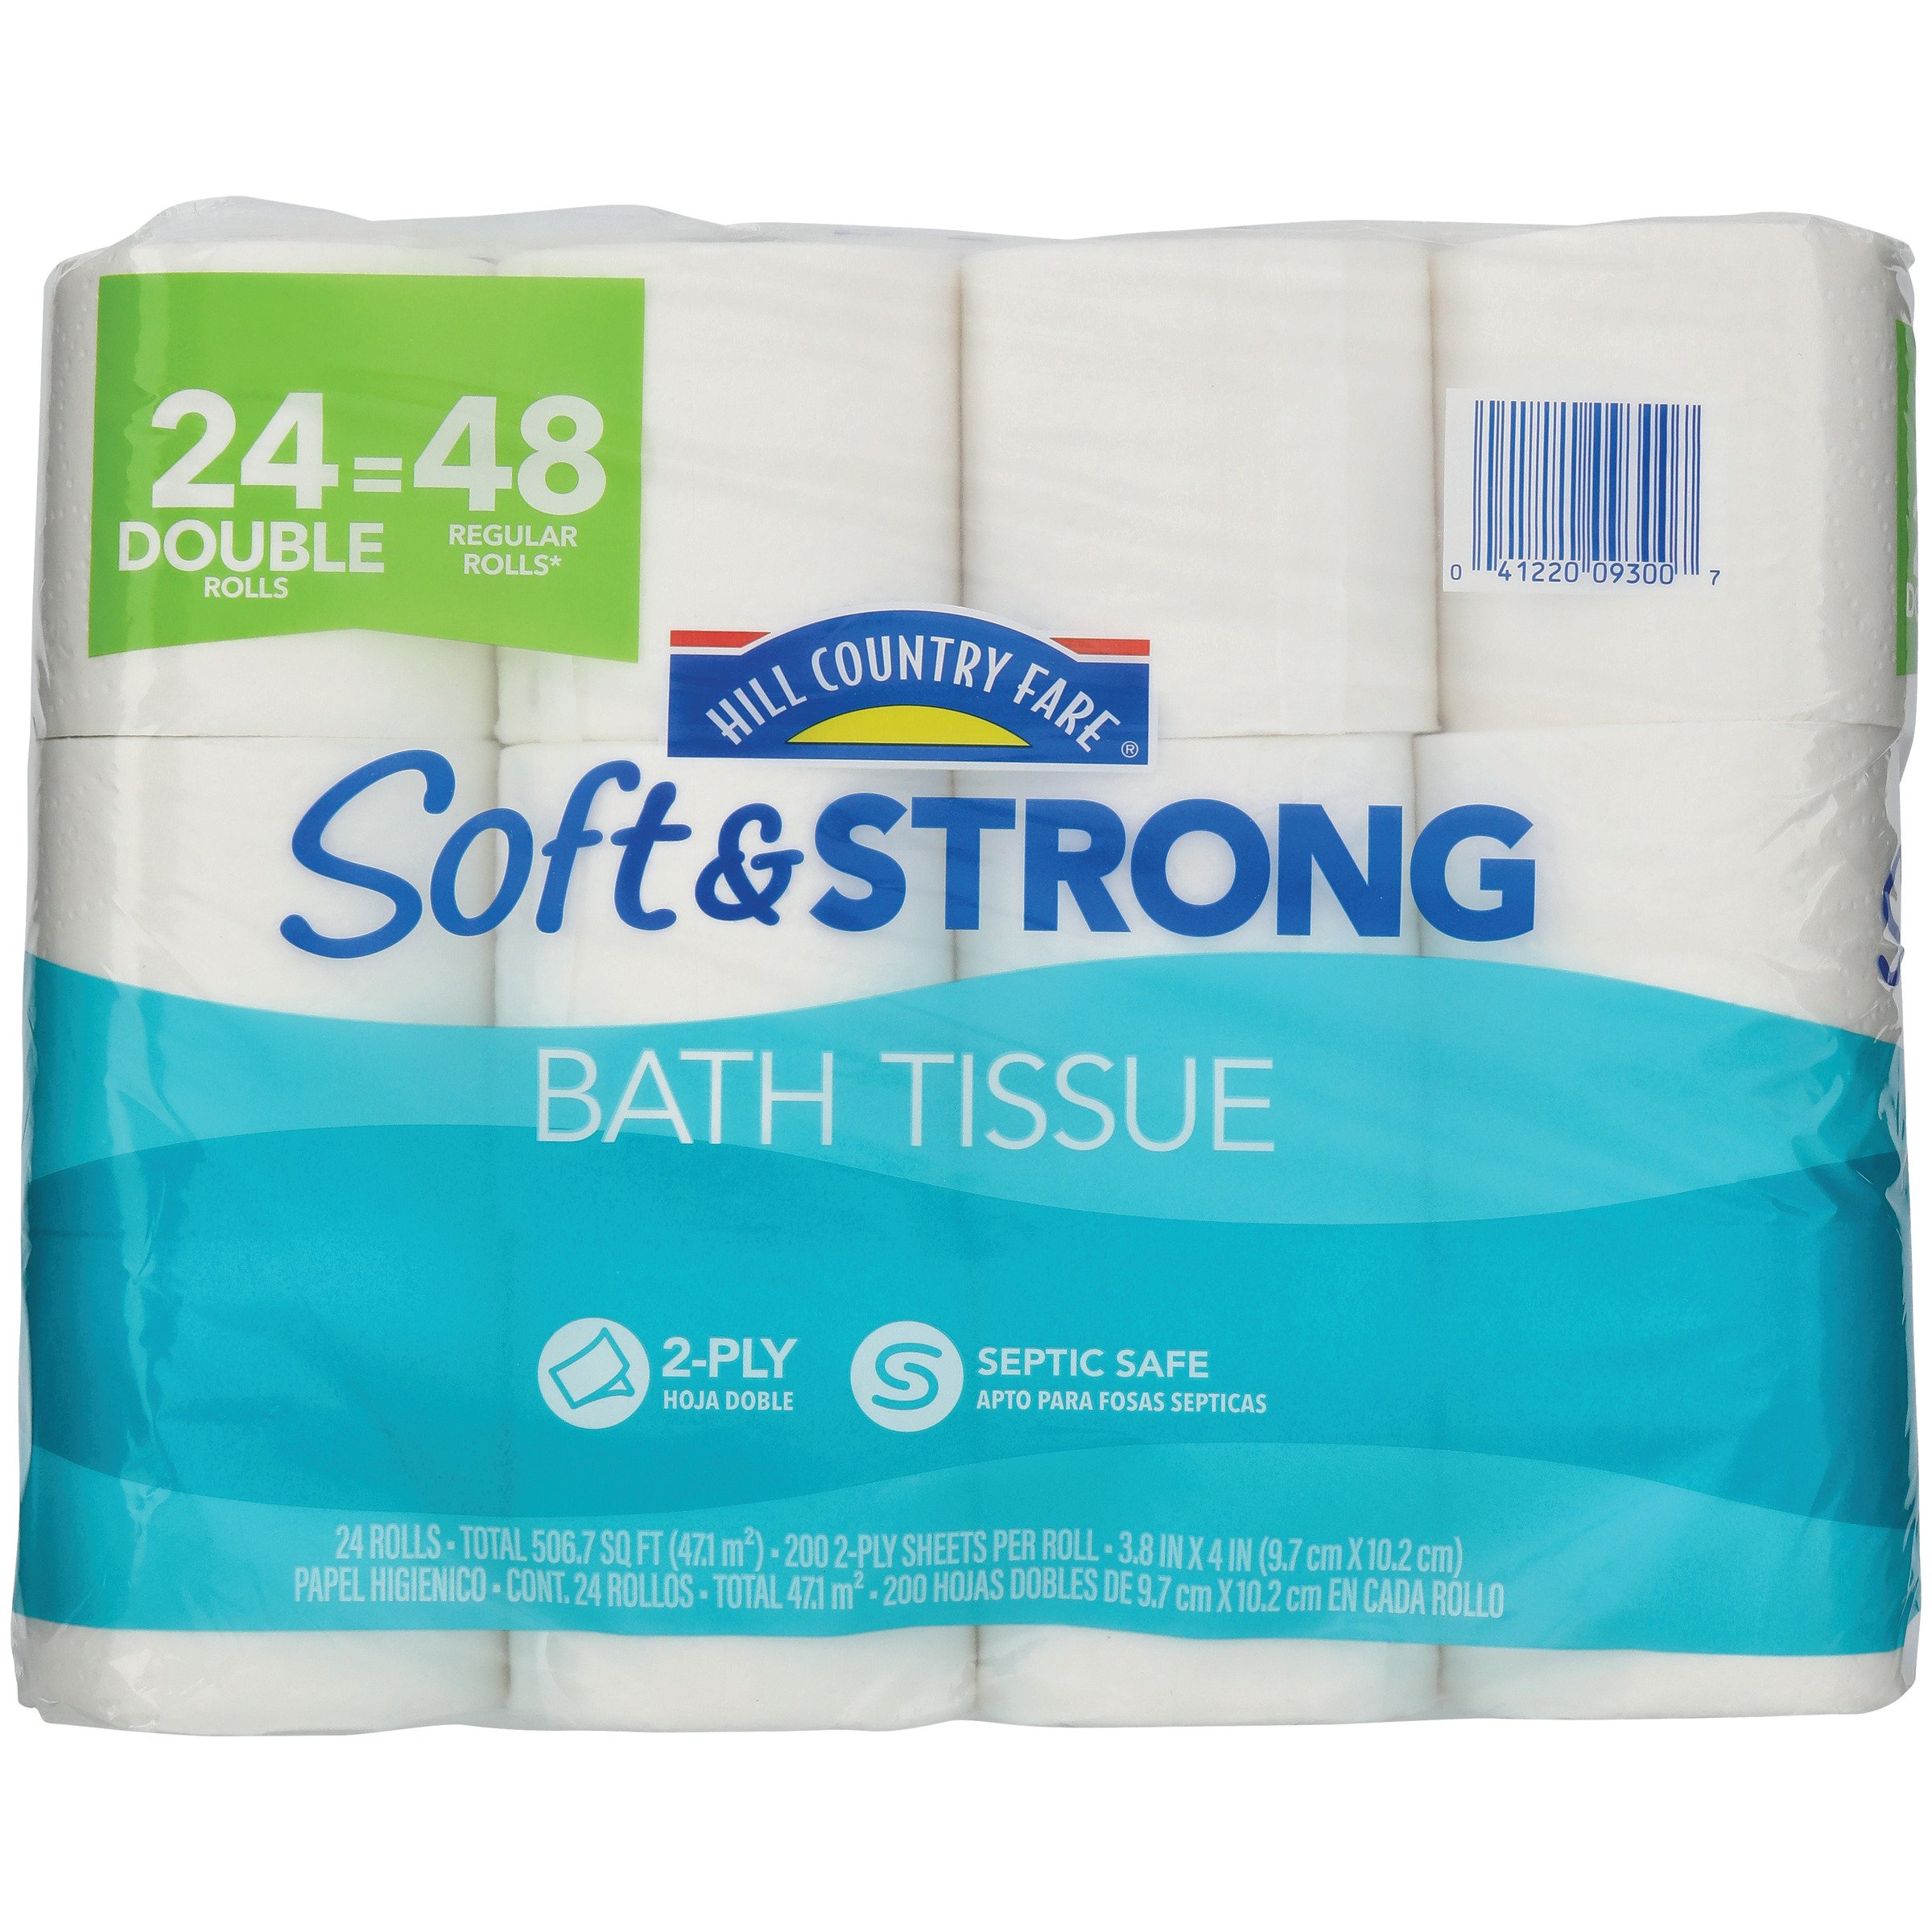 Hill Country Fare Soft & Strong Toilet Paper - Shop Toilet Paper at H-E-B